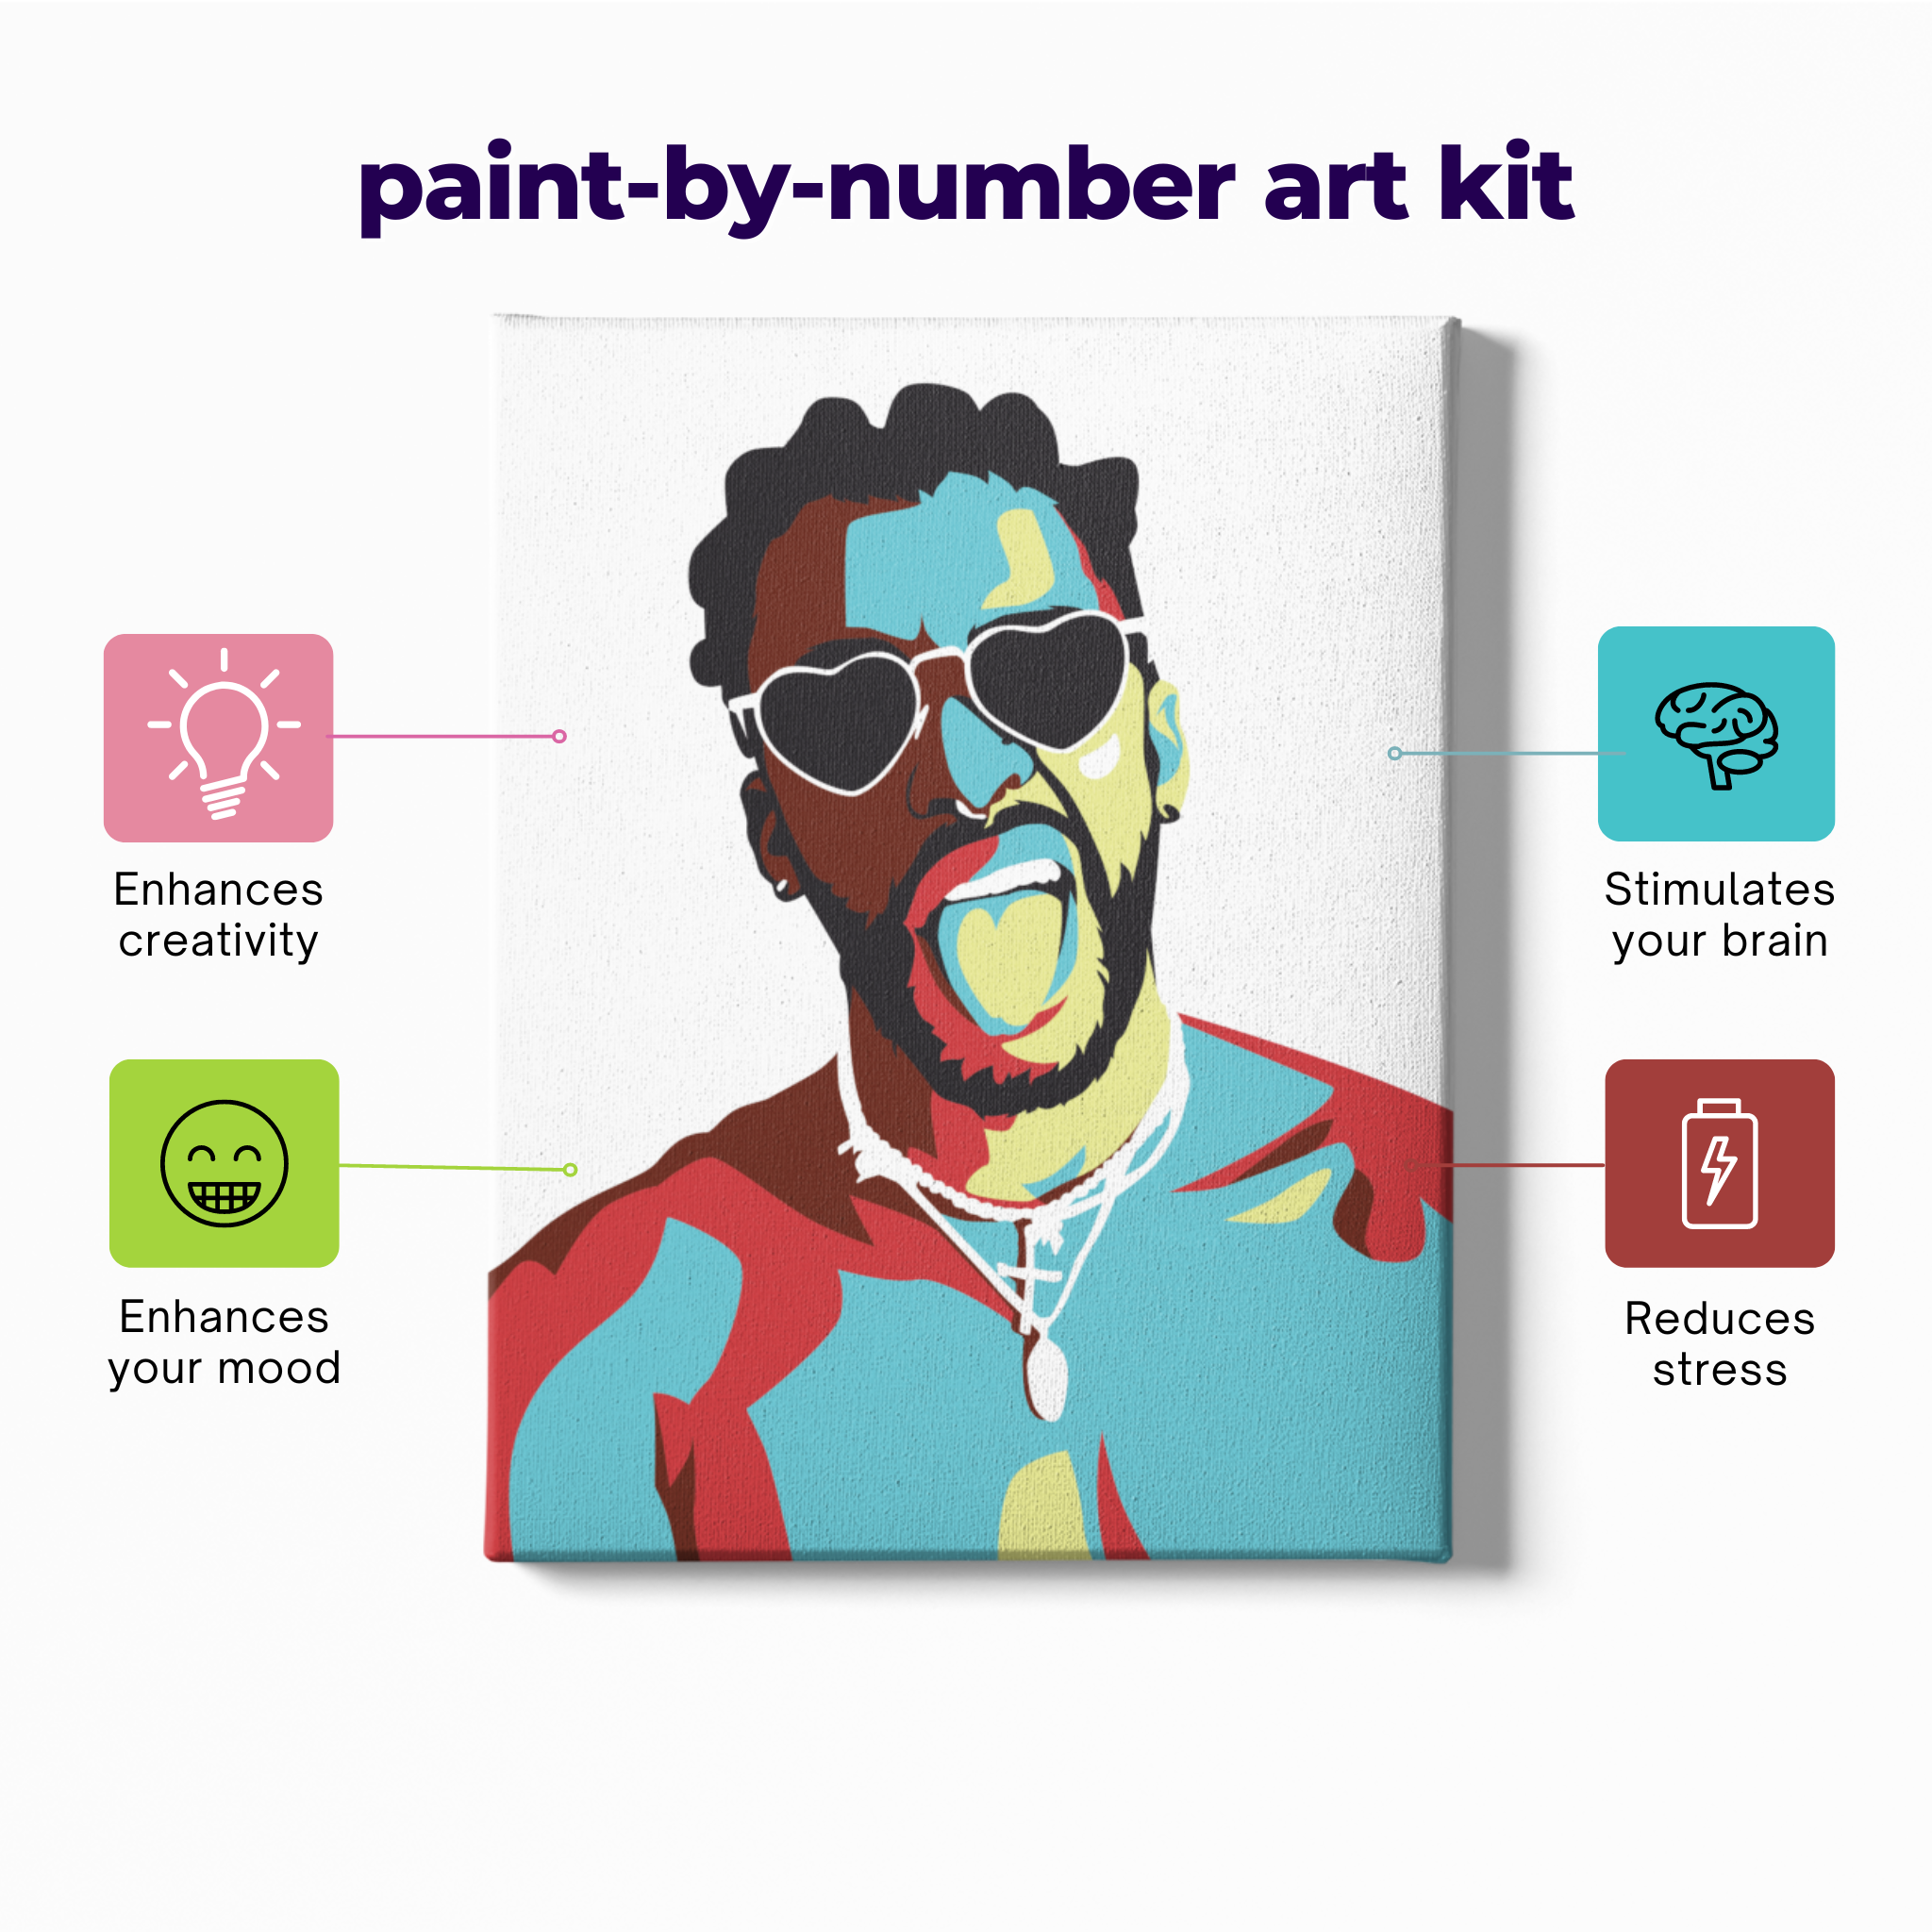 description of what is included in the art kit